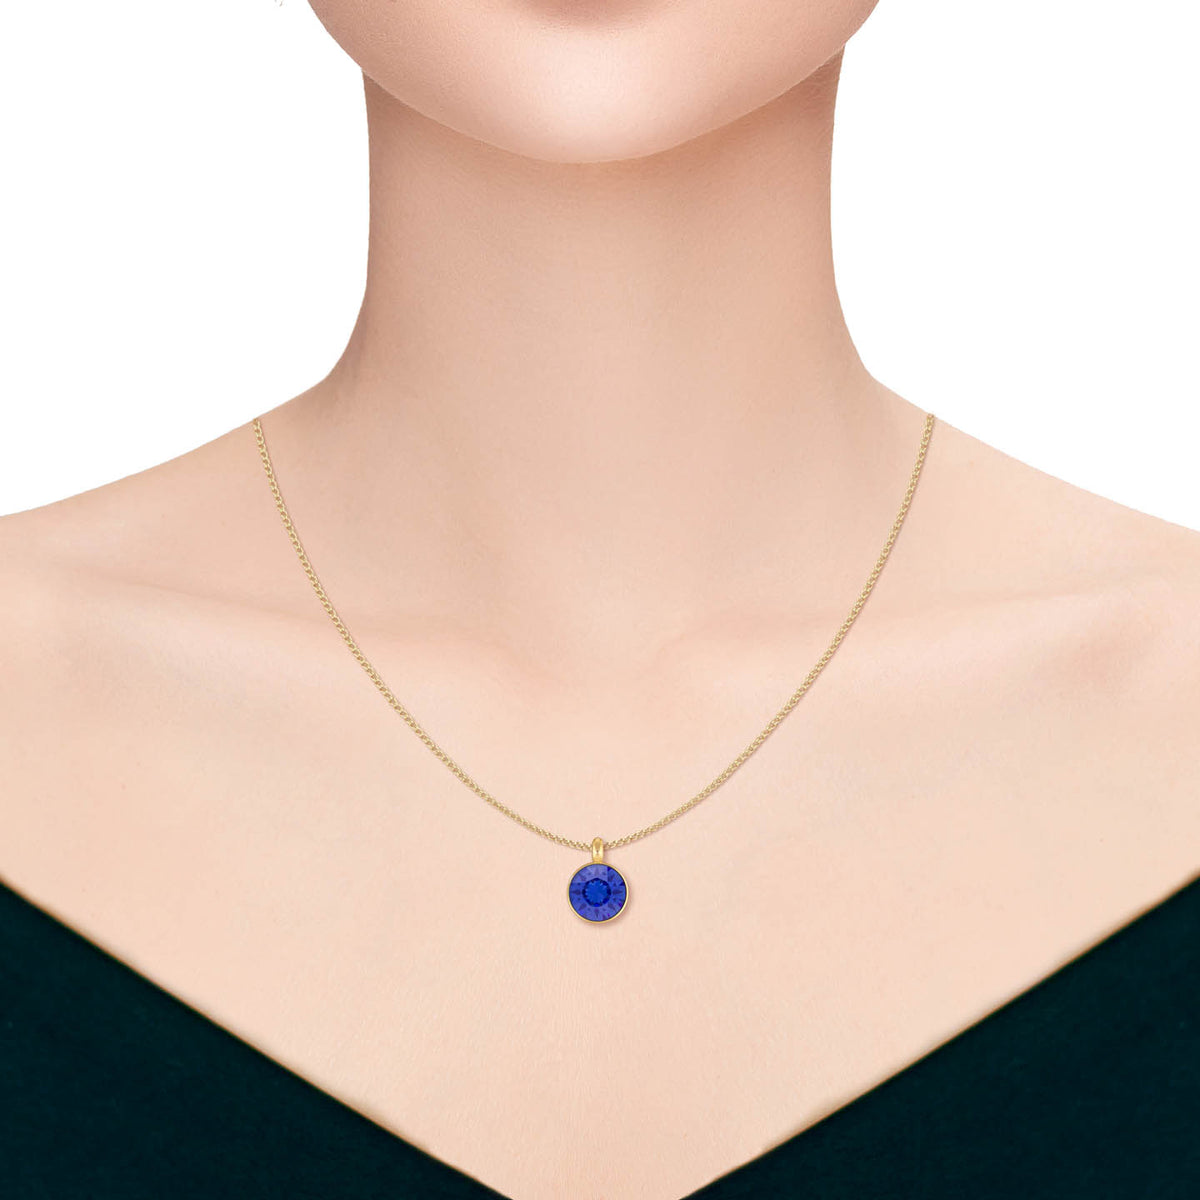 Bella Pendant Necklace with Blue Sapphire Round Crystals from Swarovski Gold Plated - Ed Heart